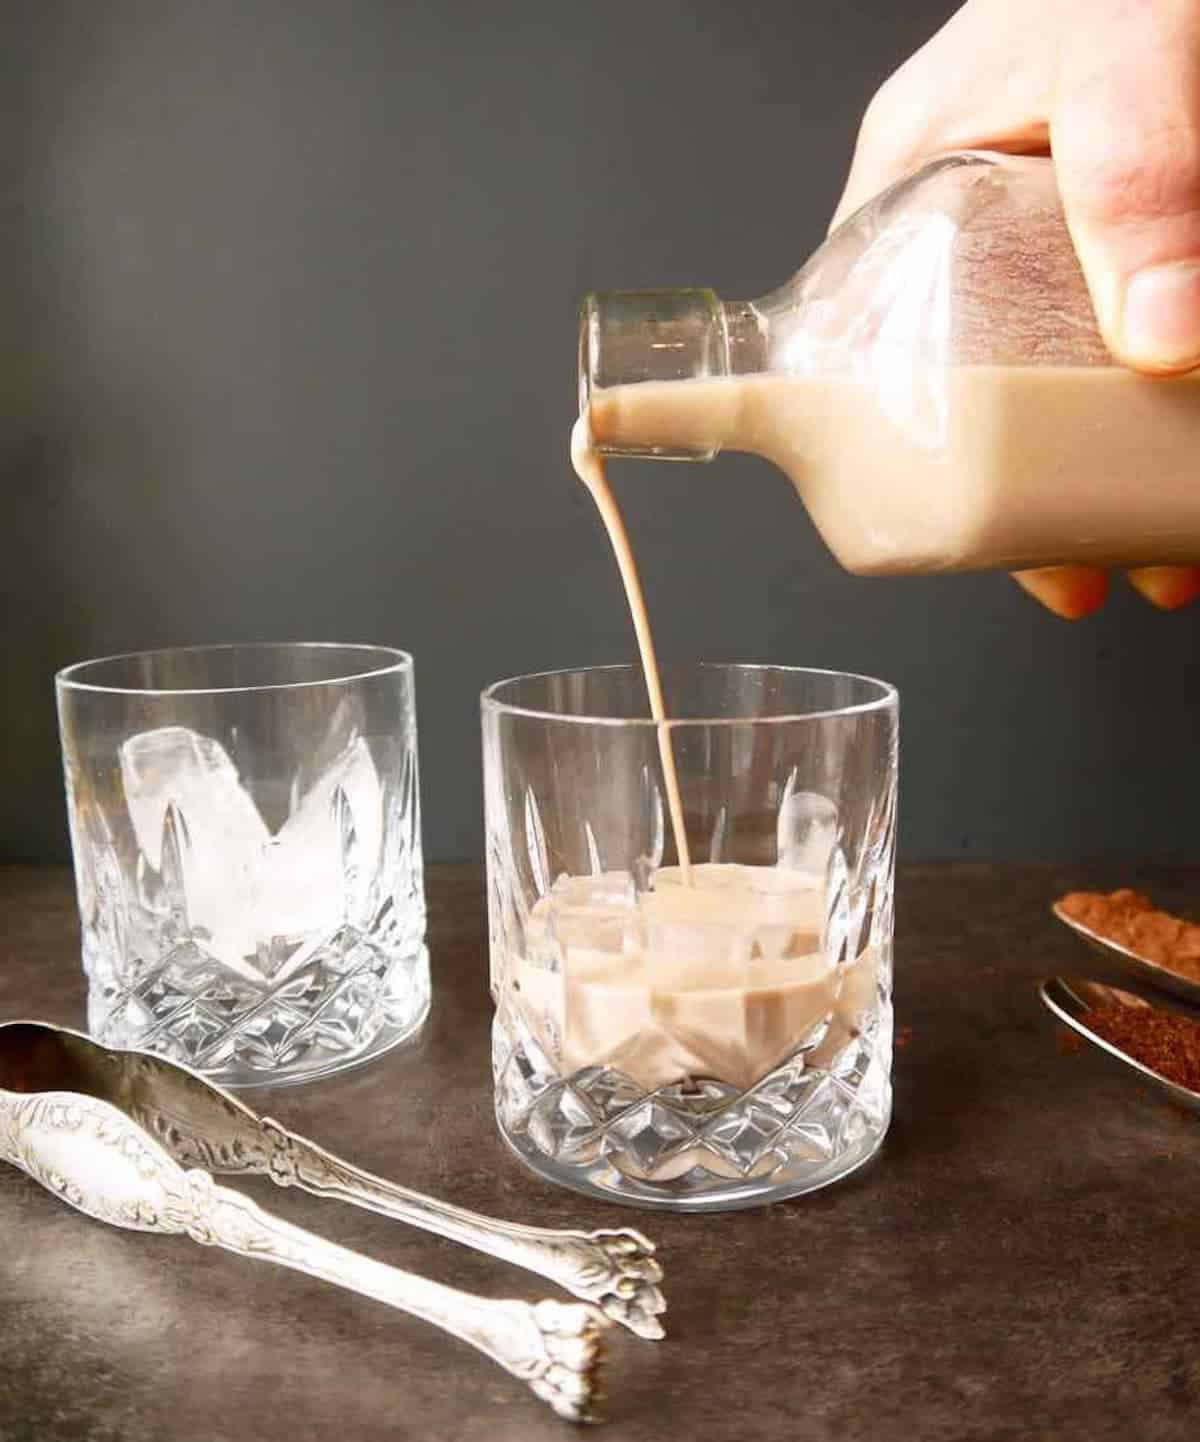 Dairy free Irish cream being poured into a glass.